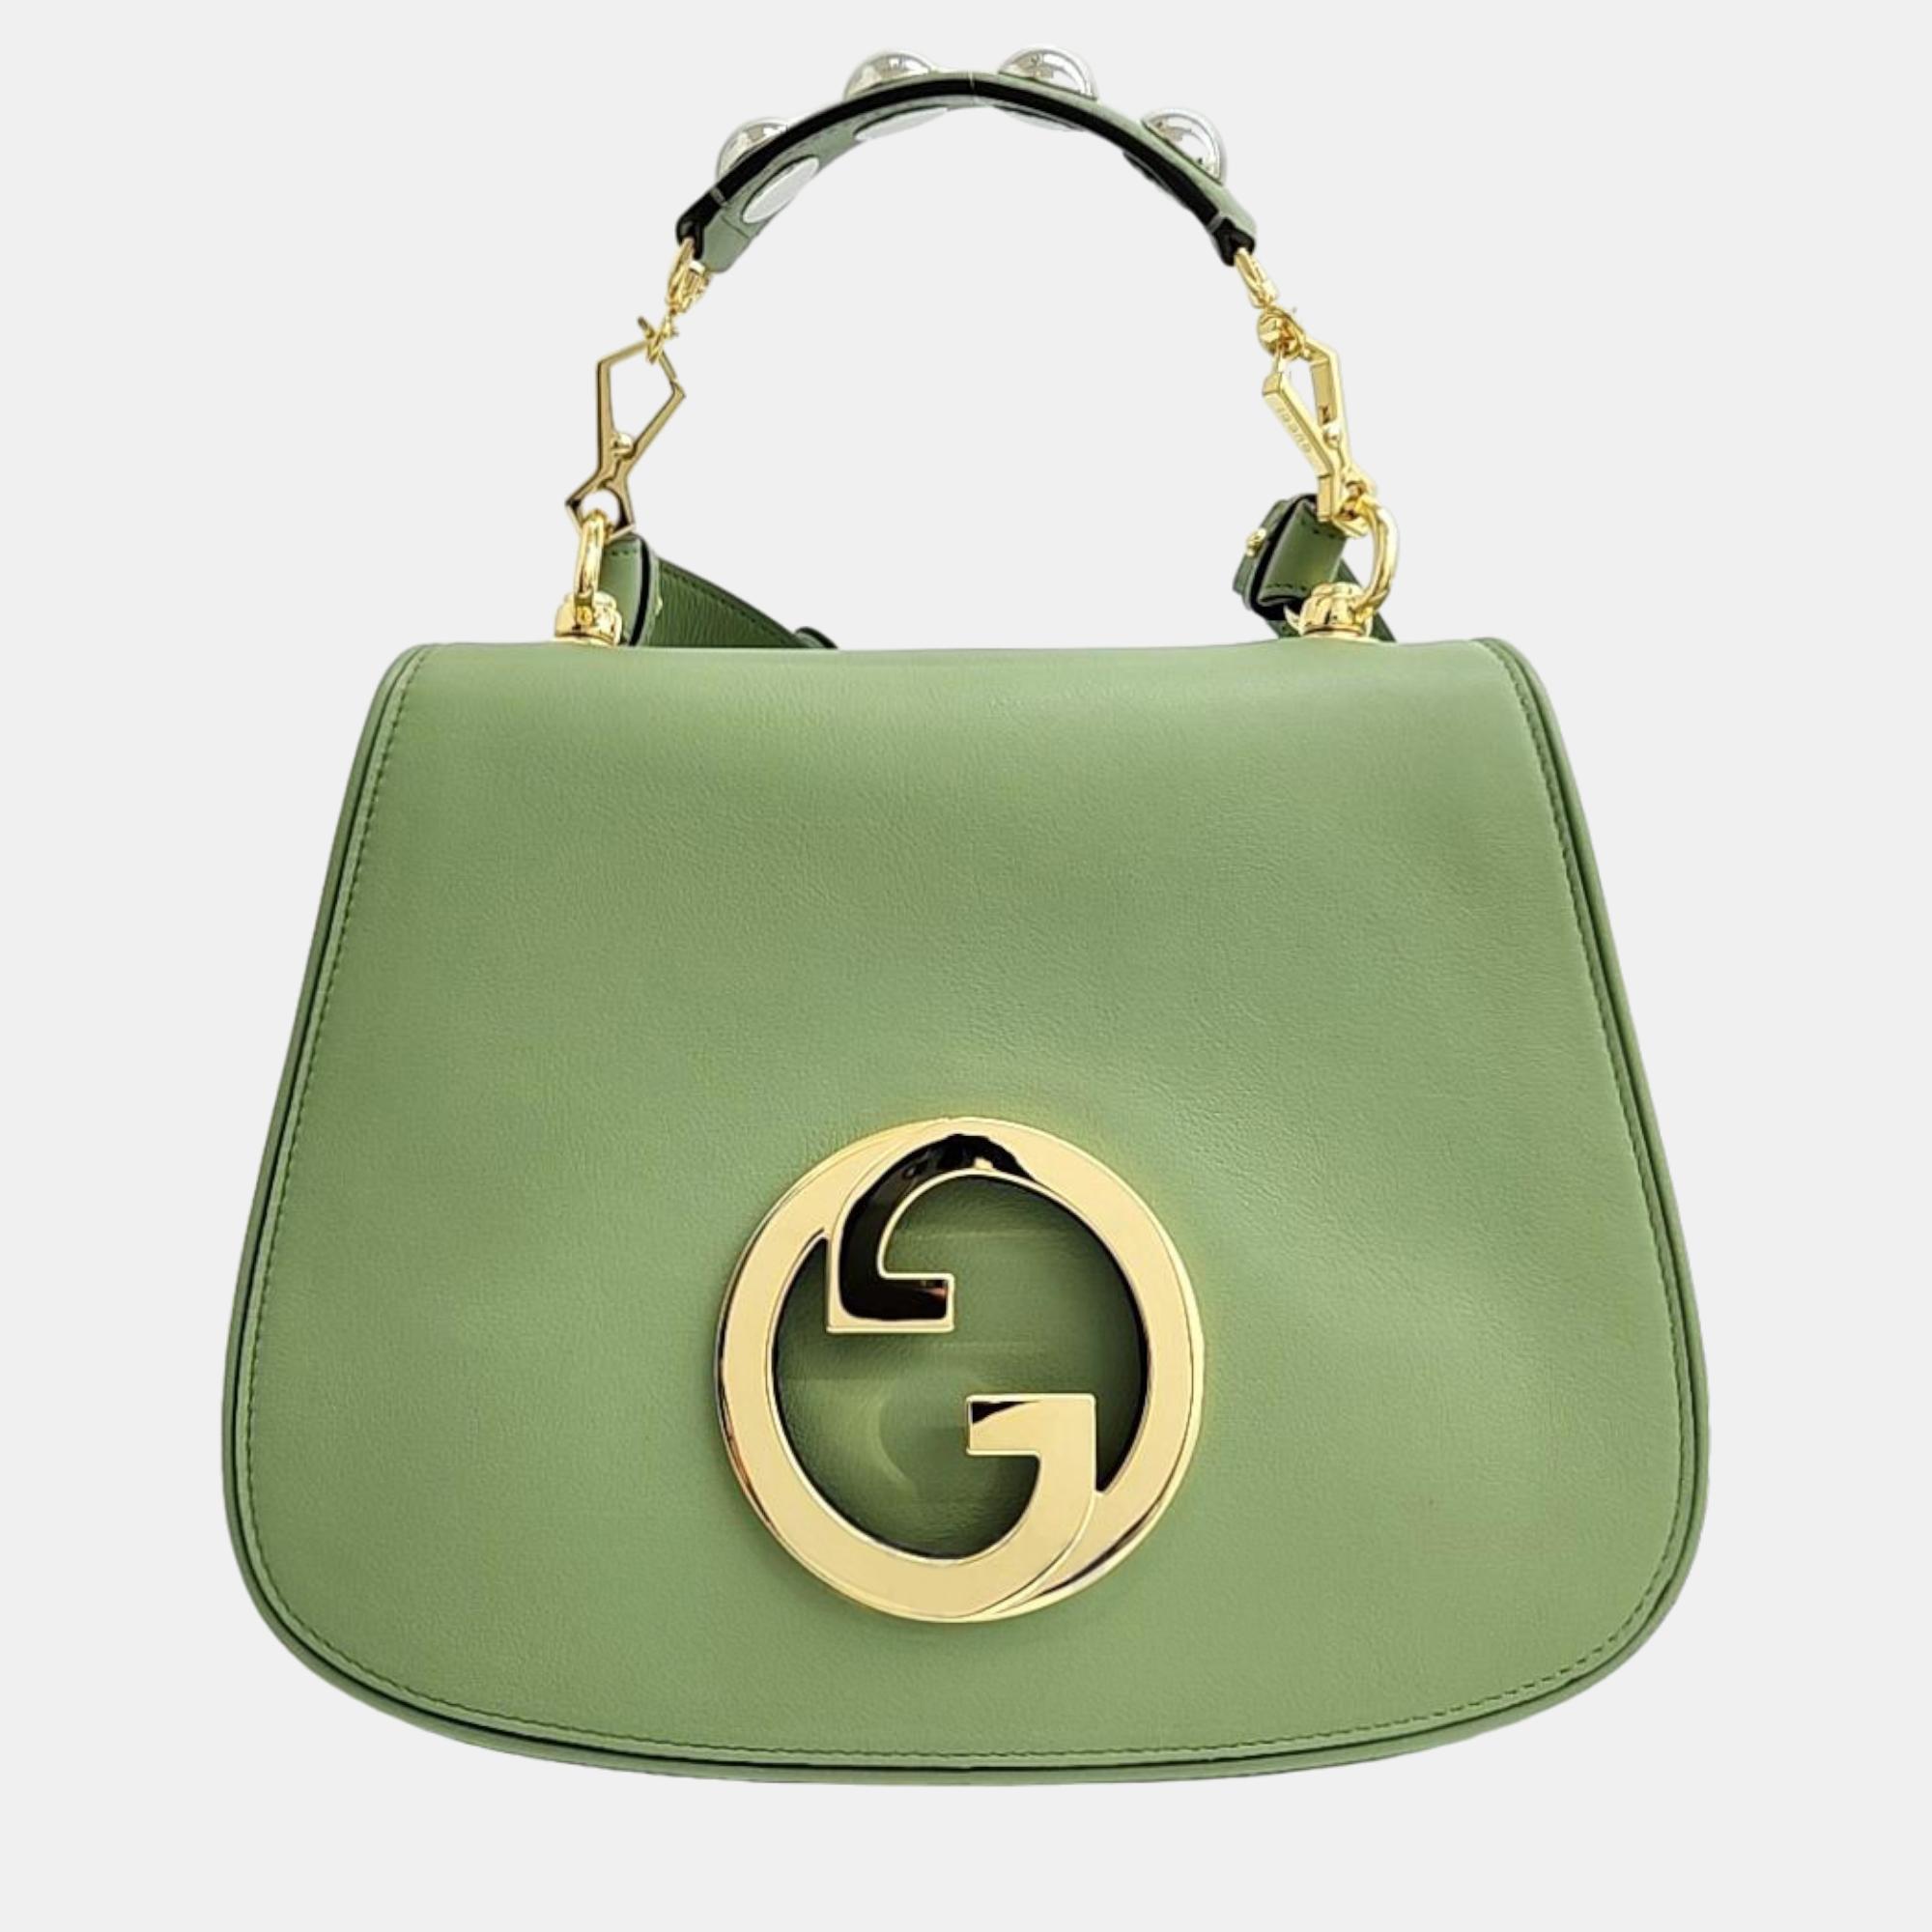 Gucci light green leather top handle blondie bag (721172)